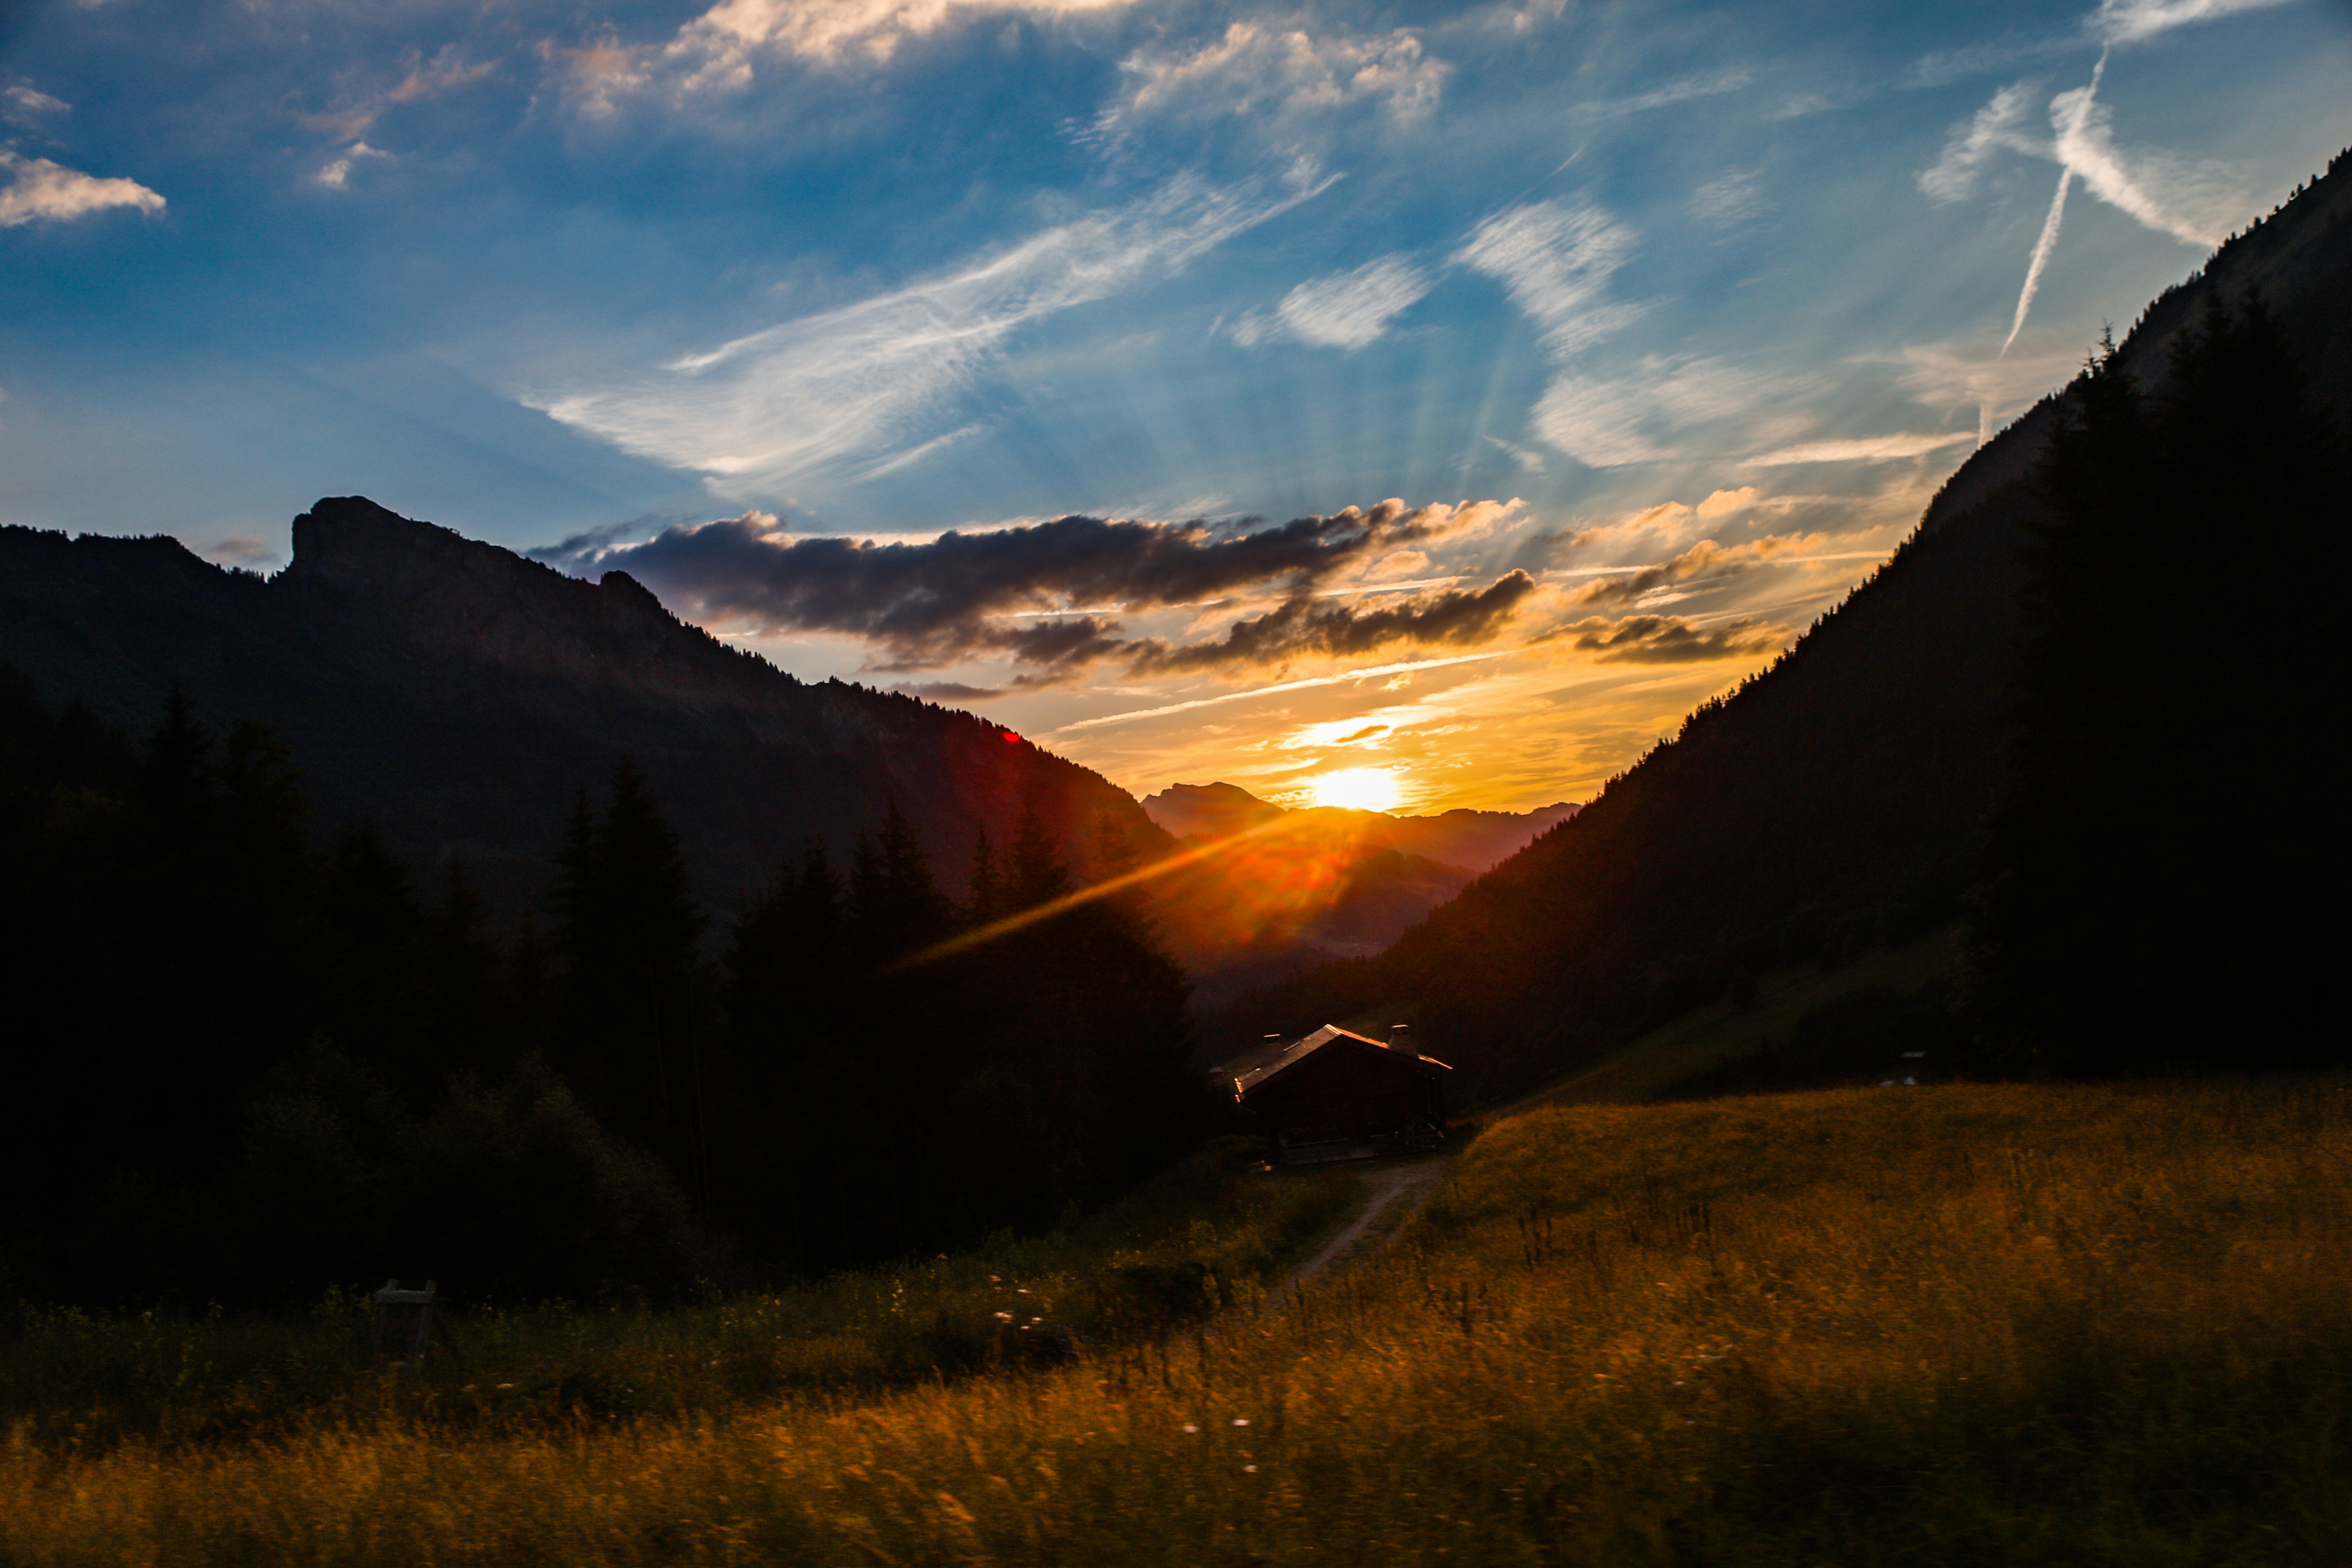 At the Lac des Mines d'Or, on the French Alps, the sun sets between two mountains, behind the idyllic scene of a simple wooden house, with a long path in the foreground. The field to the front creates an air of romance and happiness.